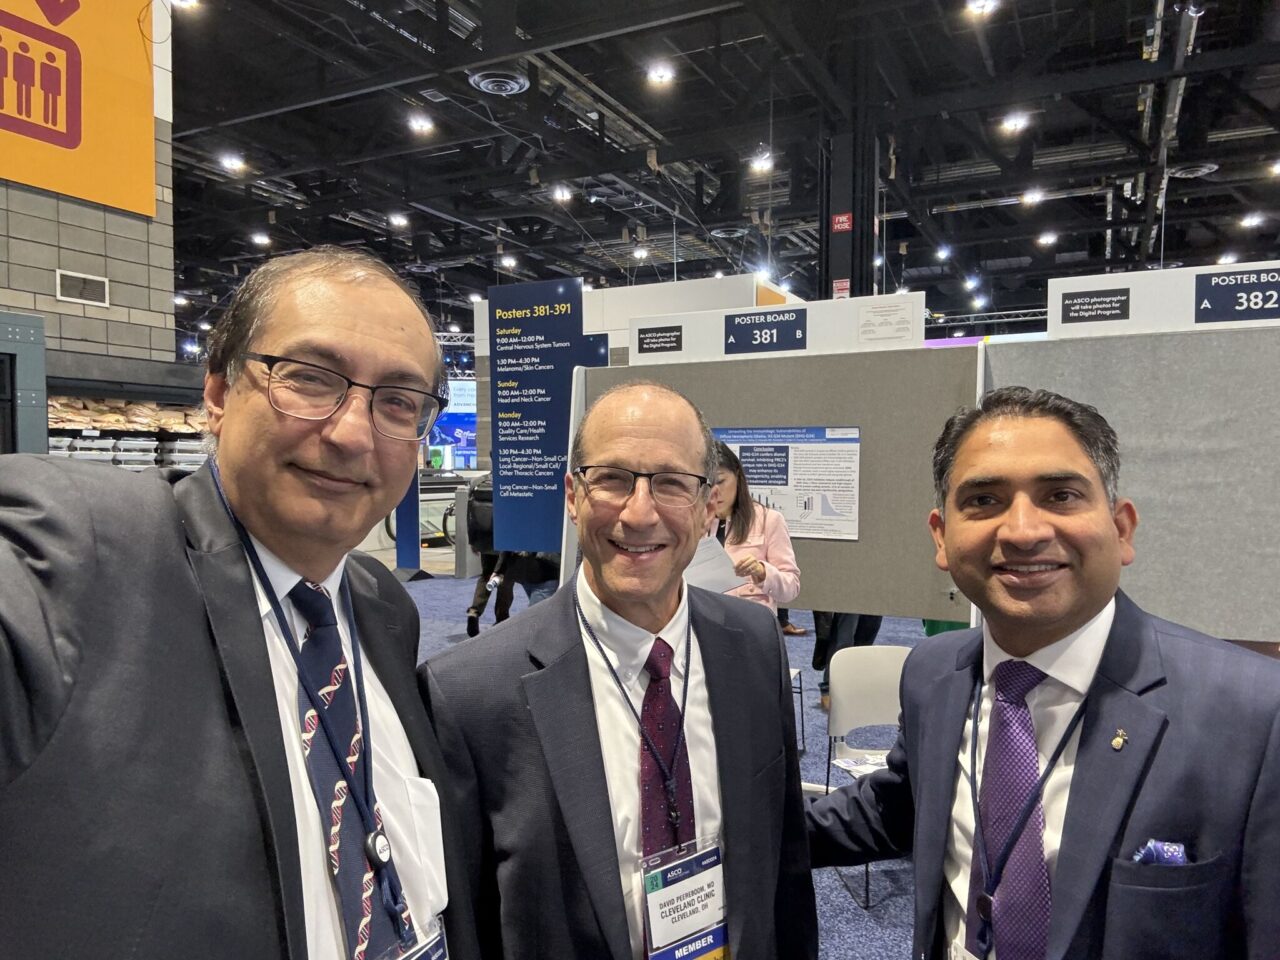 Wafik El-Deiry: Good turnout by colleagues to the CNS Tumors session at ASCO24